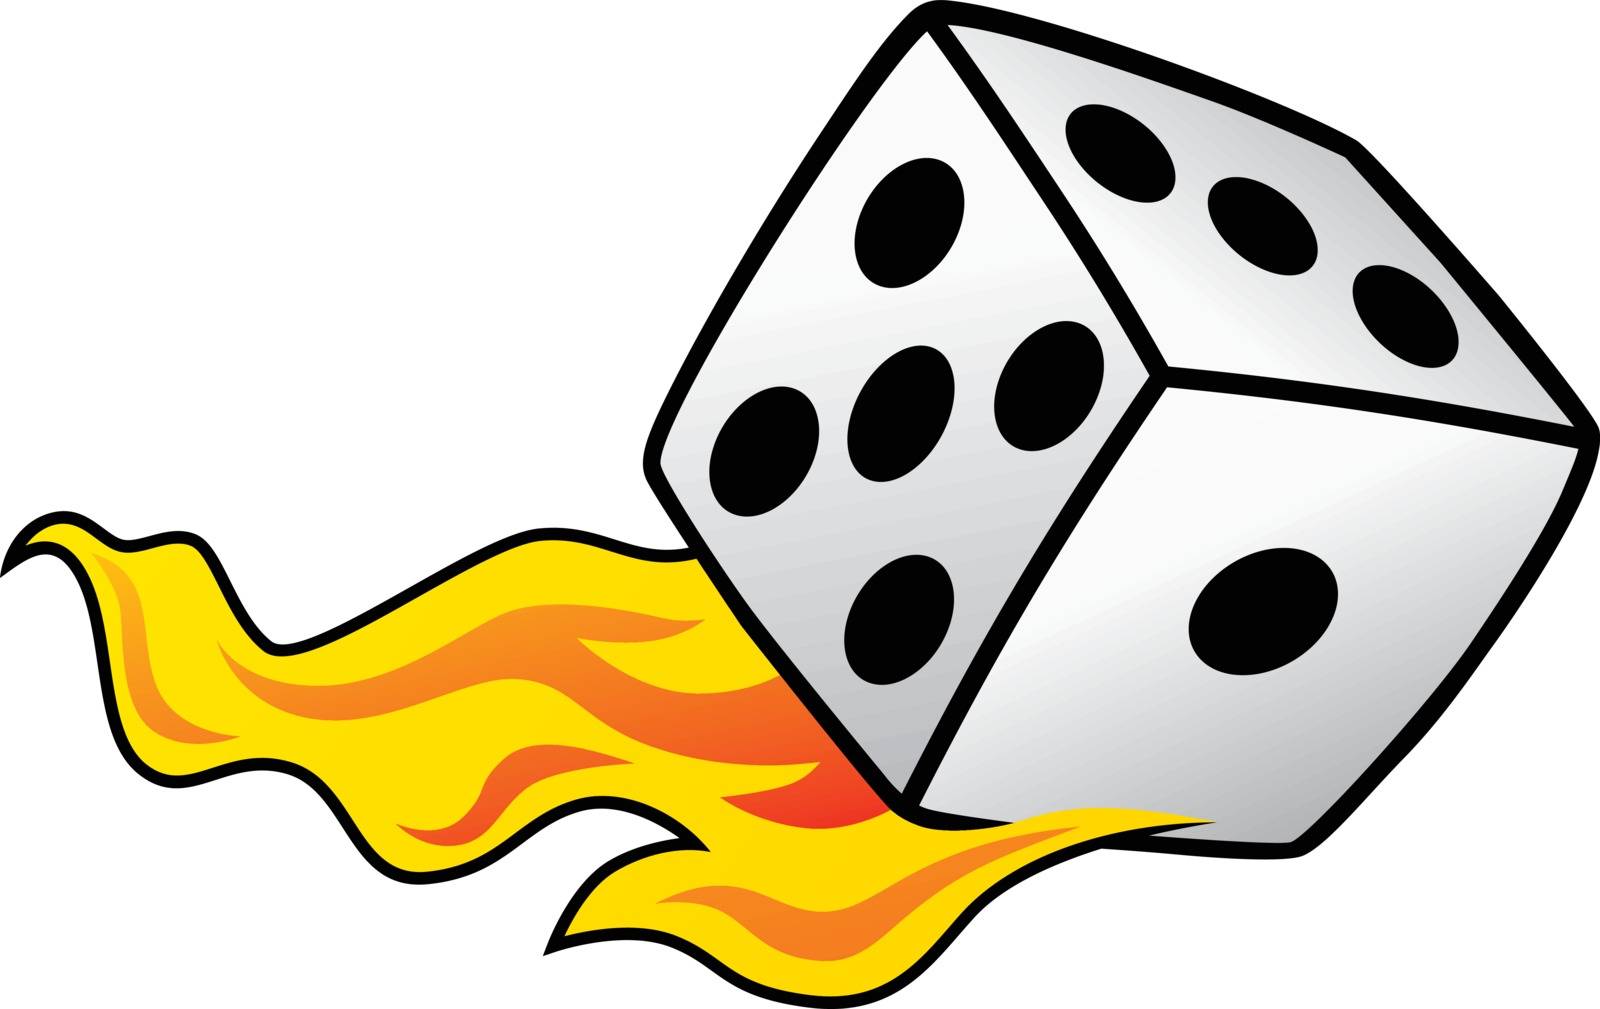 flaming on fire burning white dice risk taker gamble vector art by vector1st